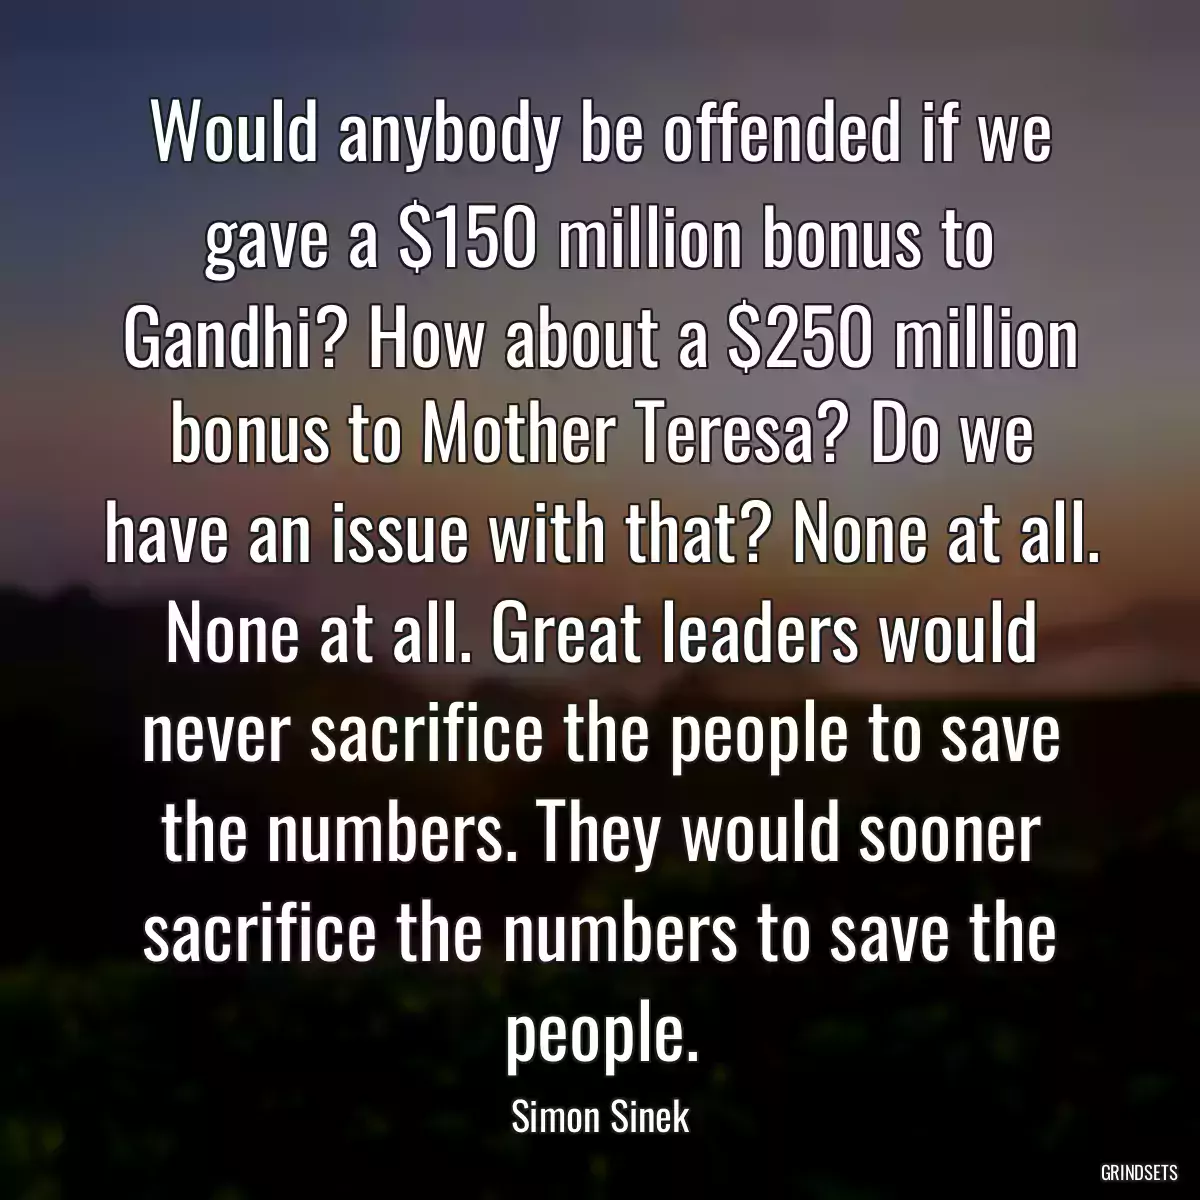 Would anybody be offended if we gave a $150 million bonus to Gandhi? How about a $250 million bonus to Mother Teresa? Do we have an issue with that? None at all. None at all. Great leaders would never sacrifice the people to save the numbers. They would sooner sacrifice the numbers to save the people.